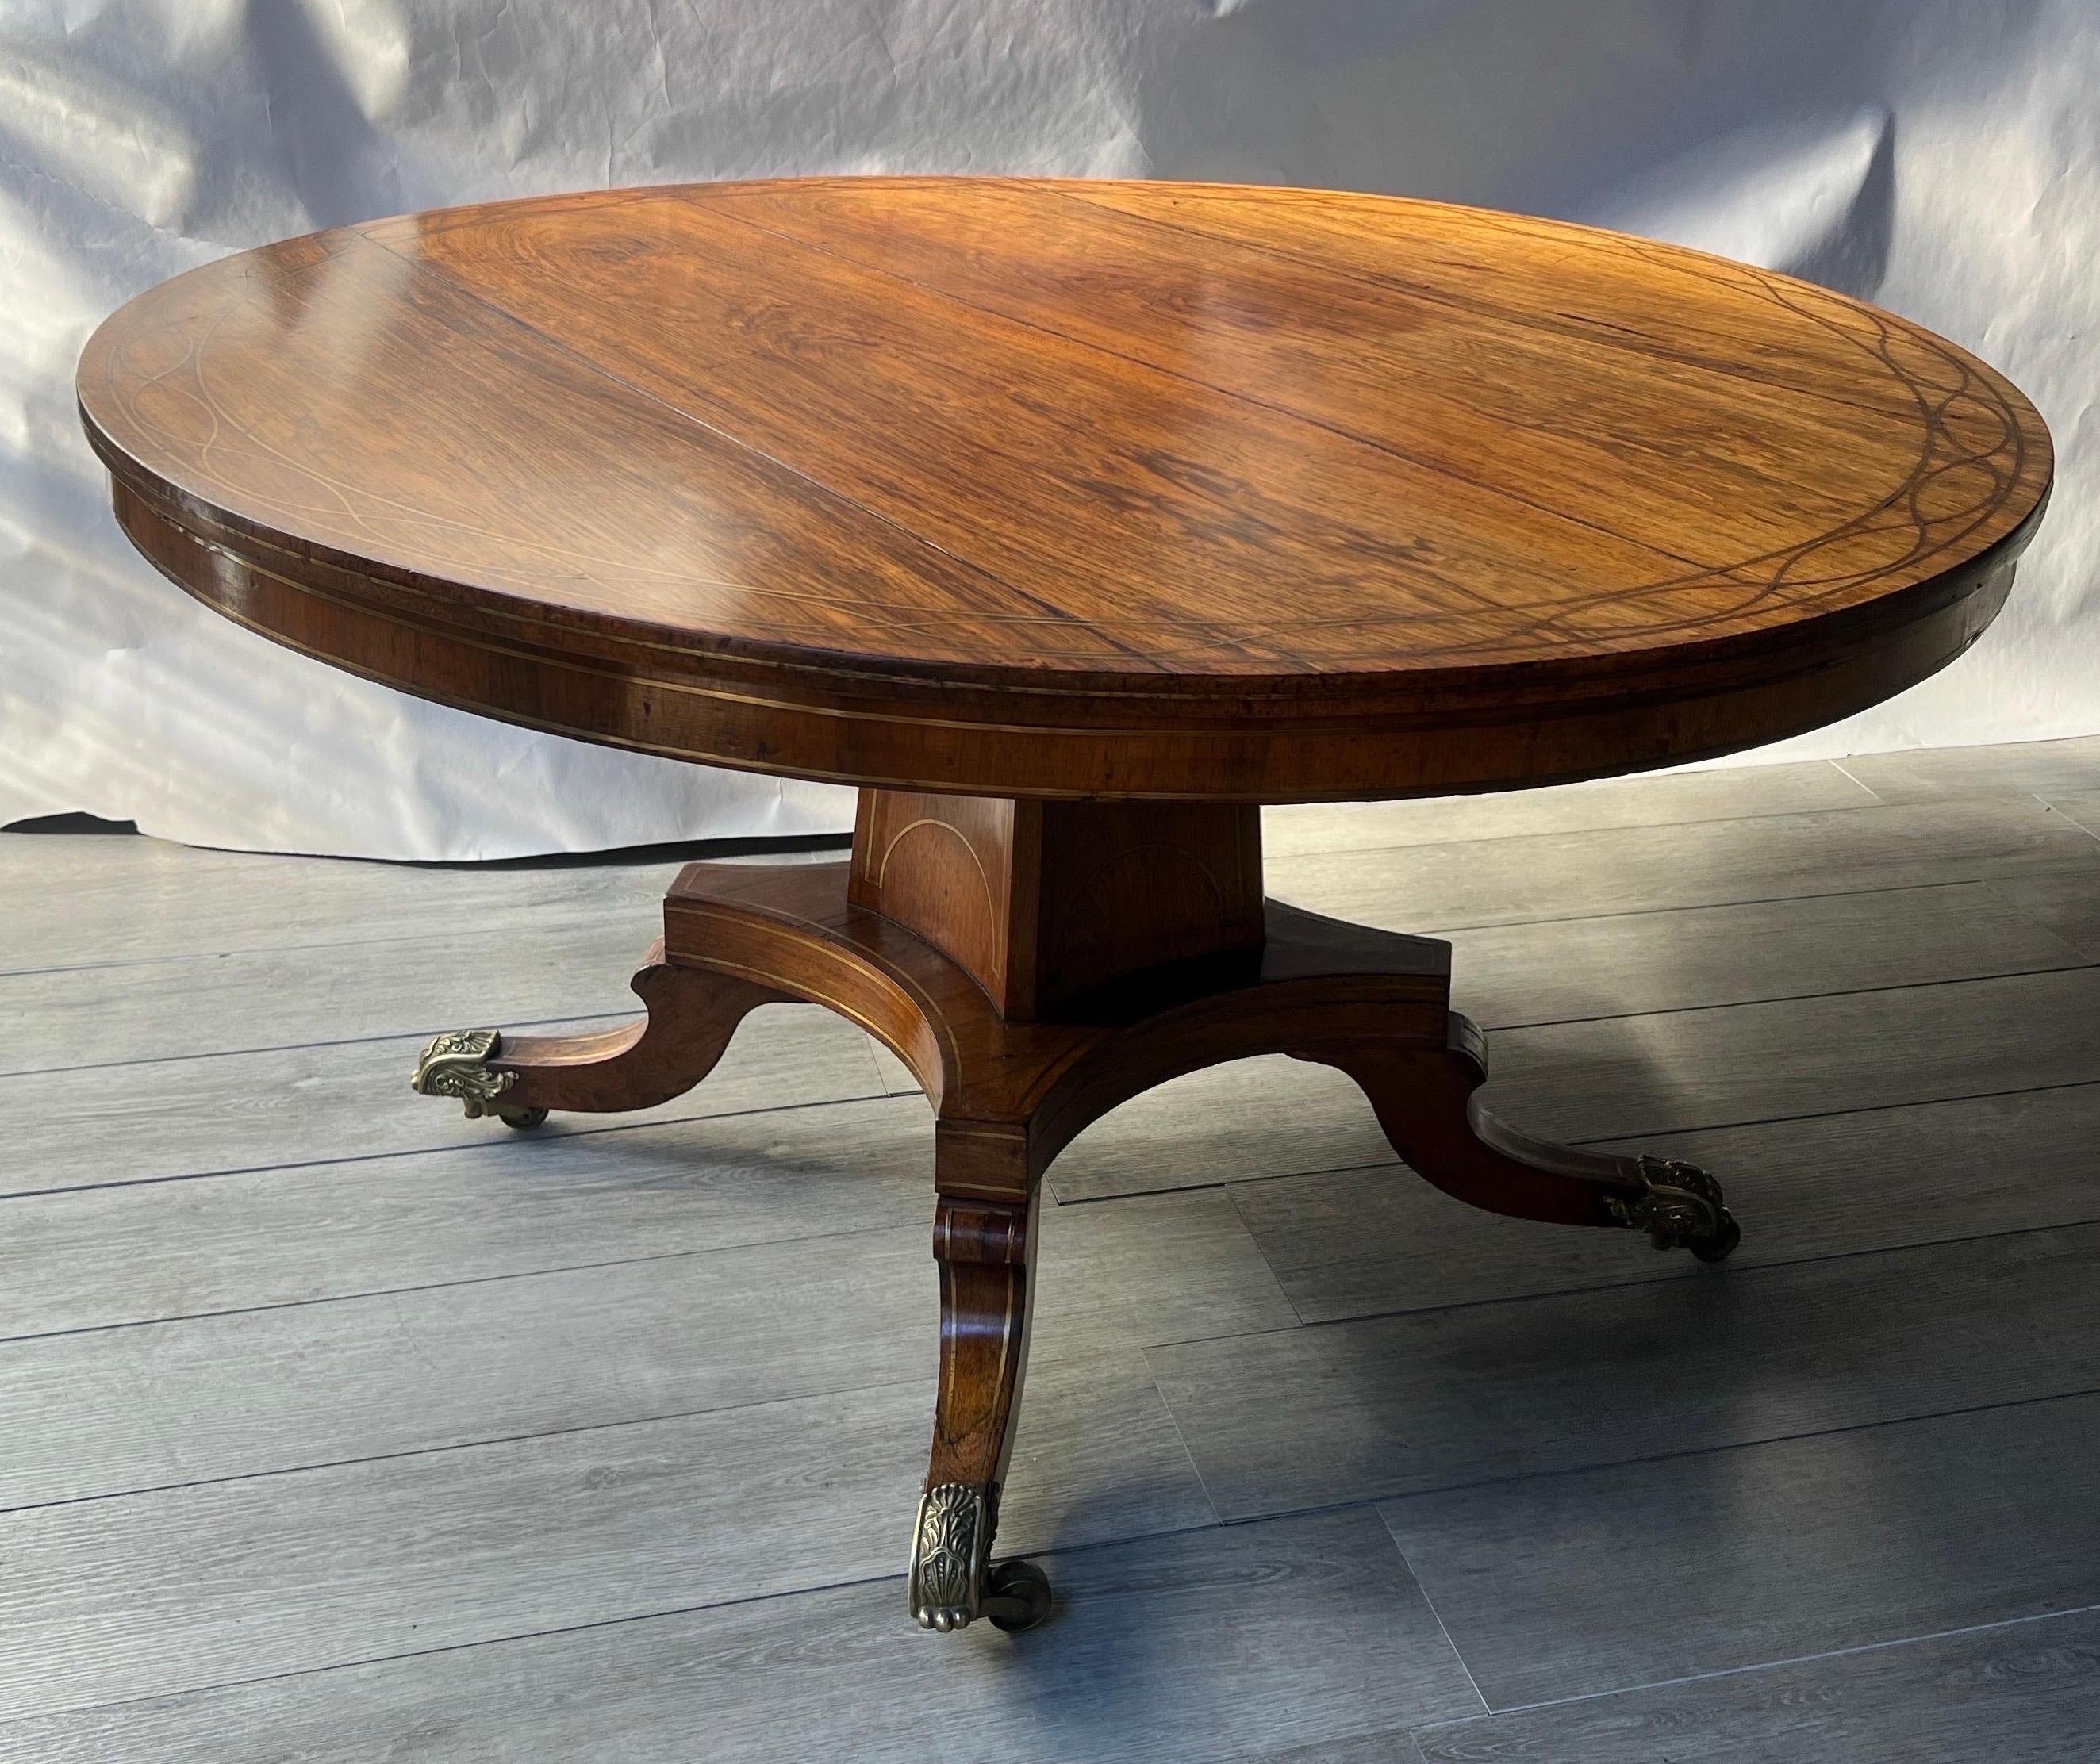 Fine 19th century brass inlaid rosewood English Regency period center table with original bronze feet on castors. Great size and scale- could easily be used as a dining or breakfast table as well 